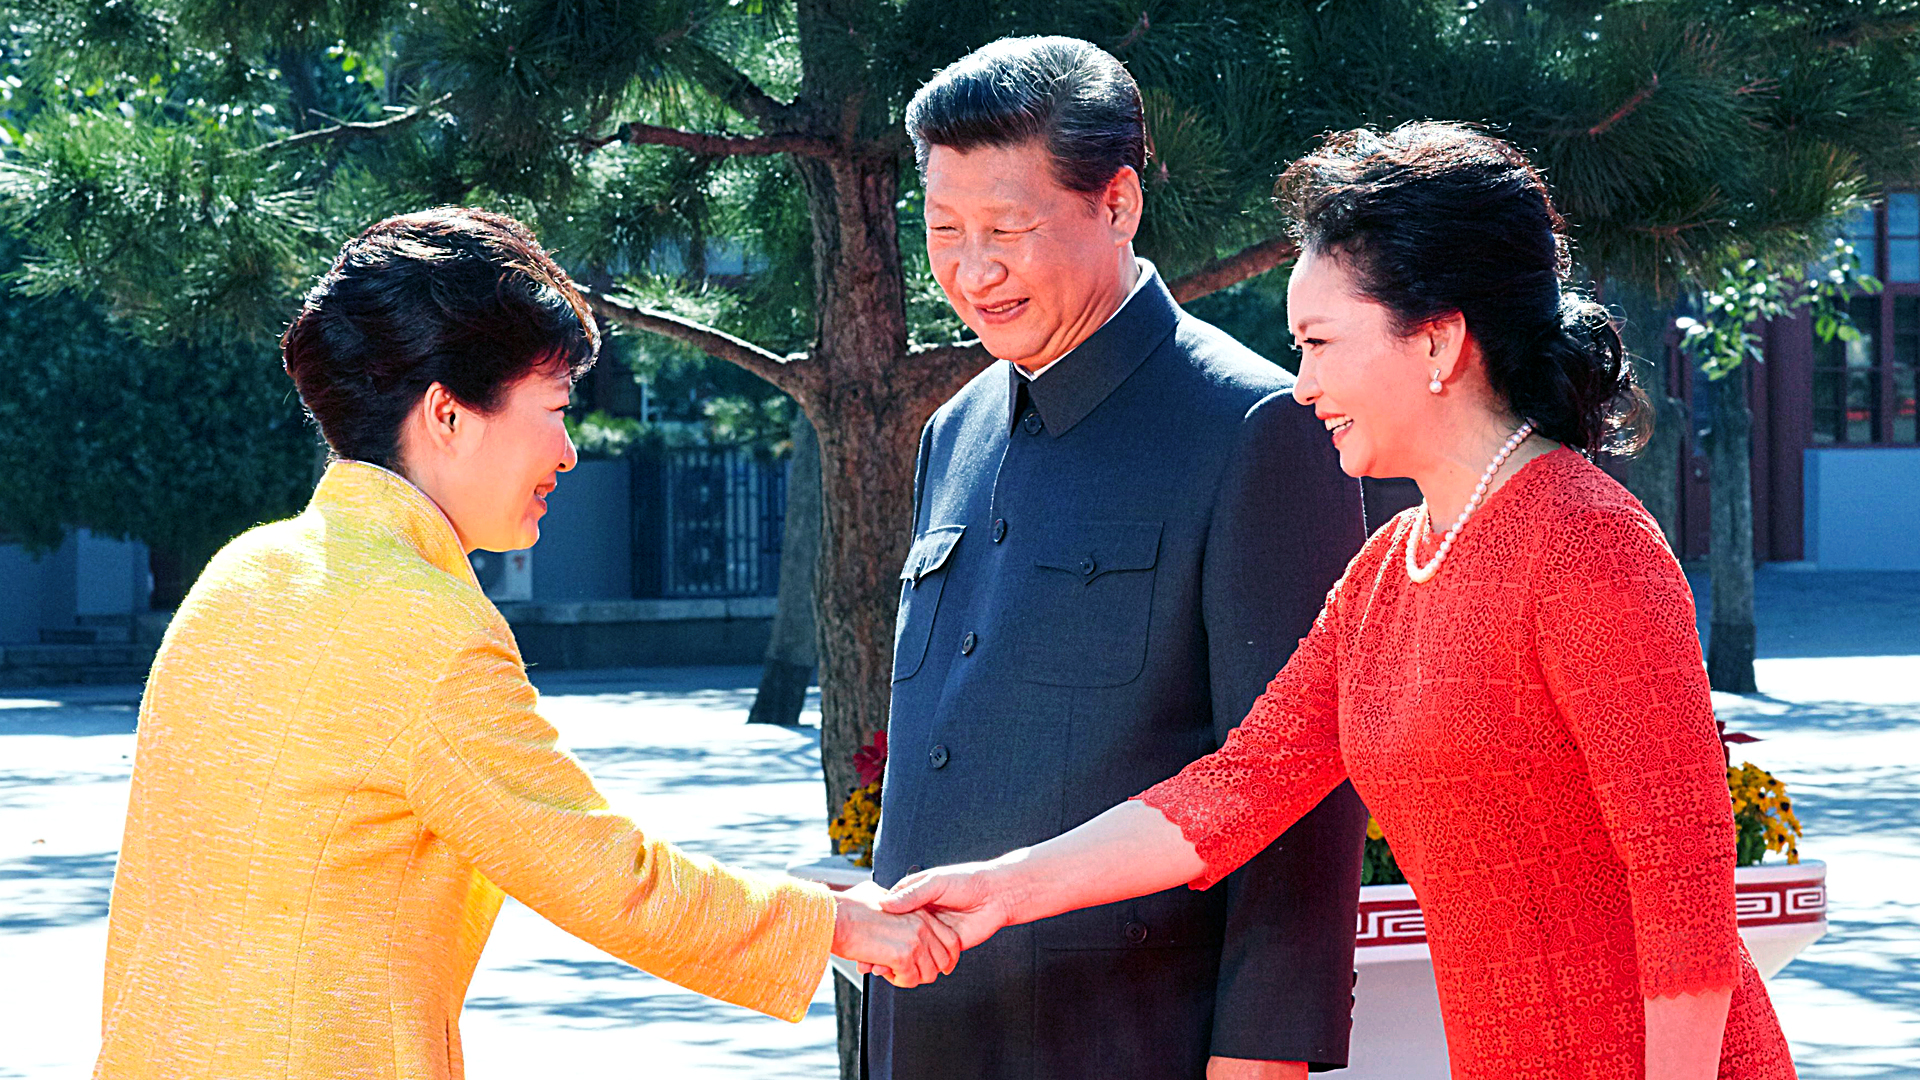 South Korean President Park Geun-hye (L) is welcomed by Chinese President Xi Jinping (C) and his wife Peng Liyuan at Tiananmen Square. Photo: EPA